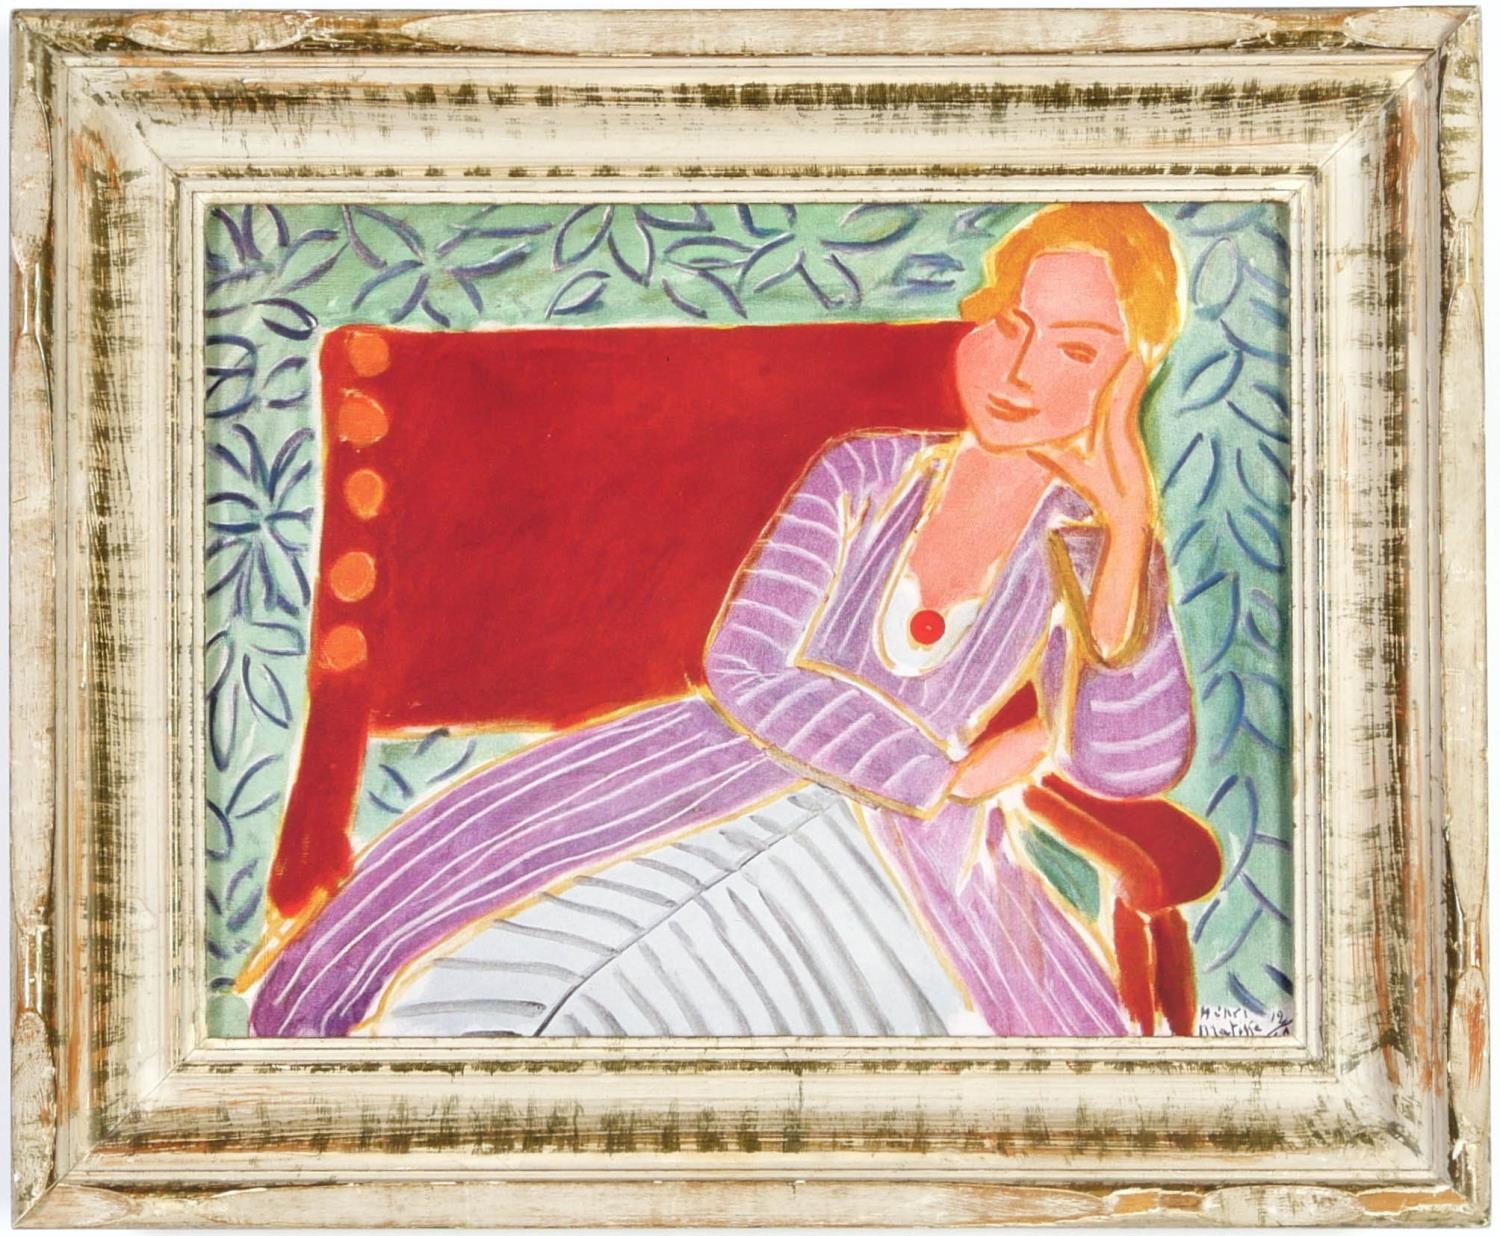 Henri Matisse, Jeune femme assise, Off set lithograph, signed in the plate, Vintage French